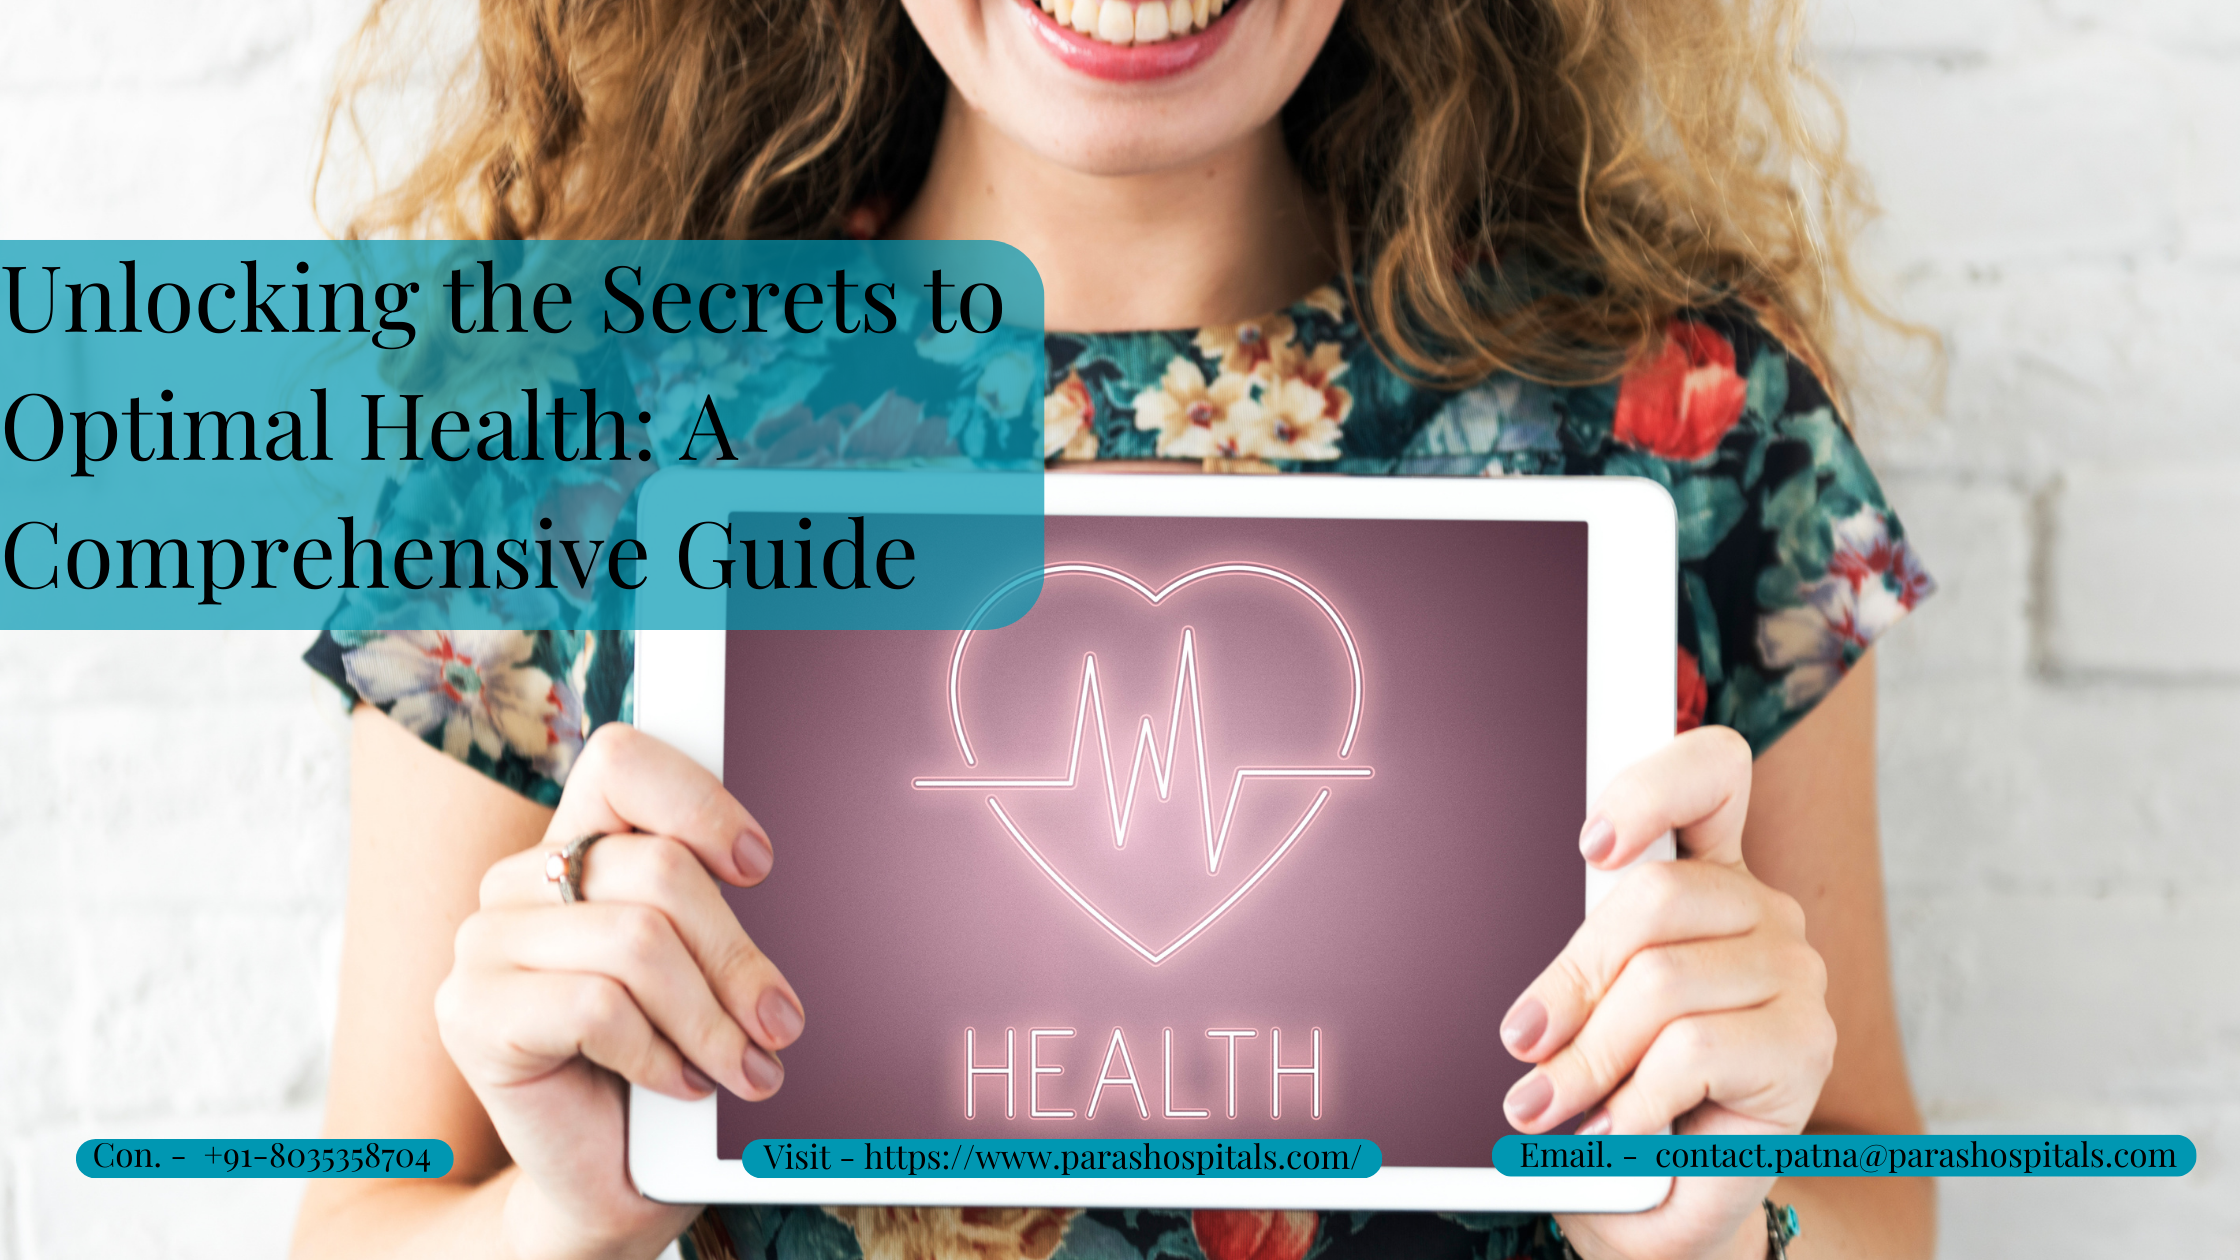 Unlocking the Secrets to Optimal Health: A Comprehensive Guide